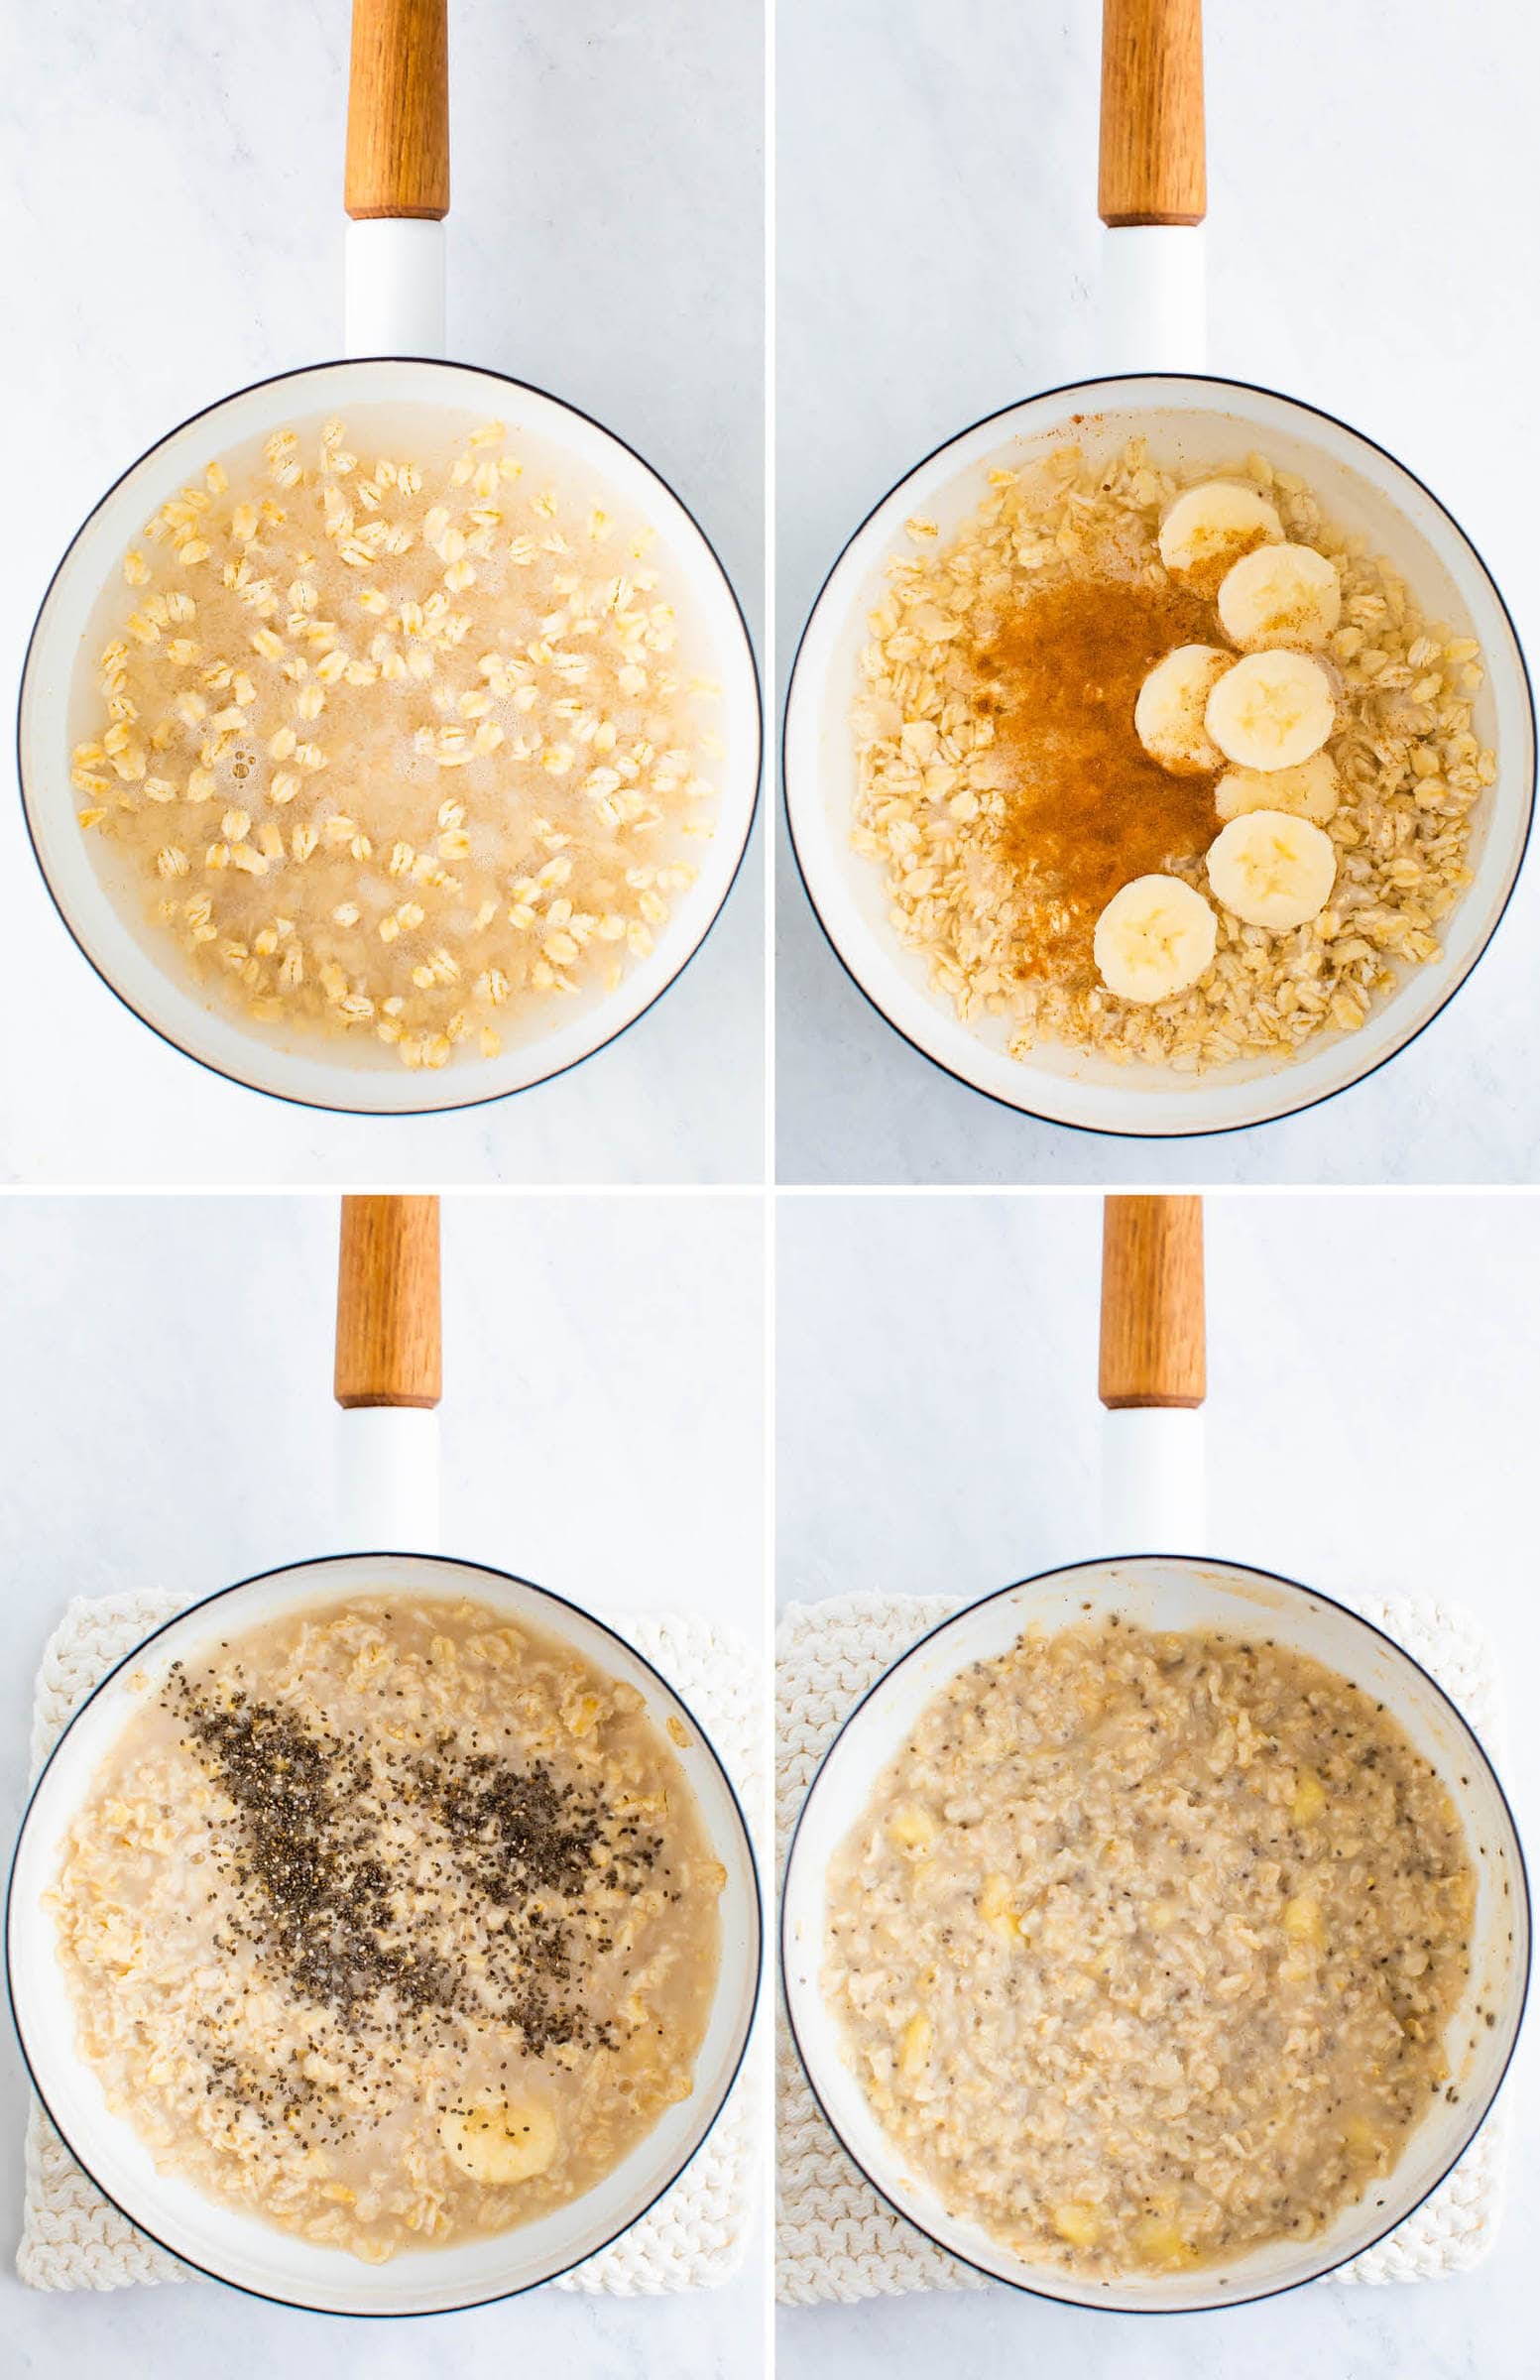 Collage of four photos of the process of making banana chia oatmeal. 1. Pot with water and oats. 2. Added cinnamon and banana. 3. Added chia seeds. 4. Oatmeal is cooked in the pot.